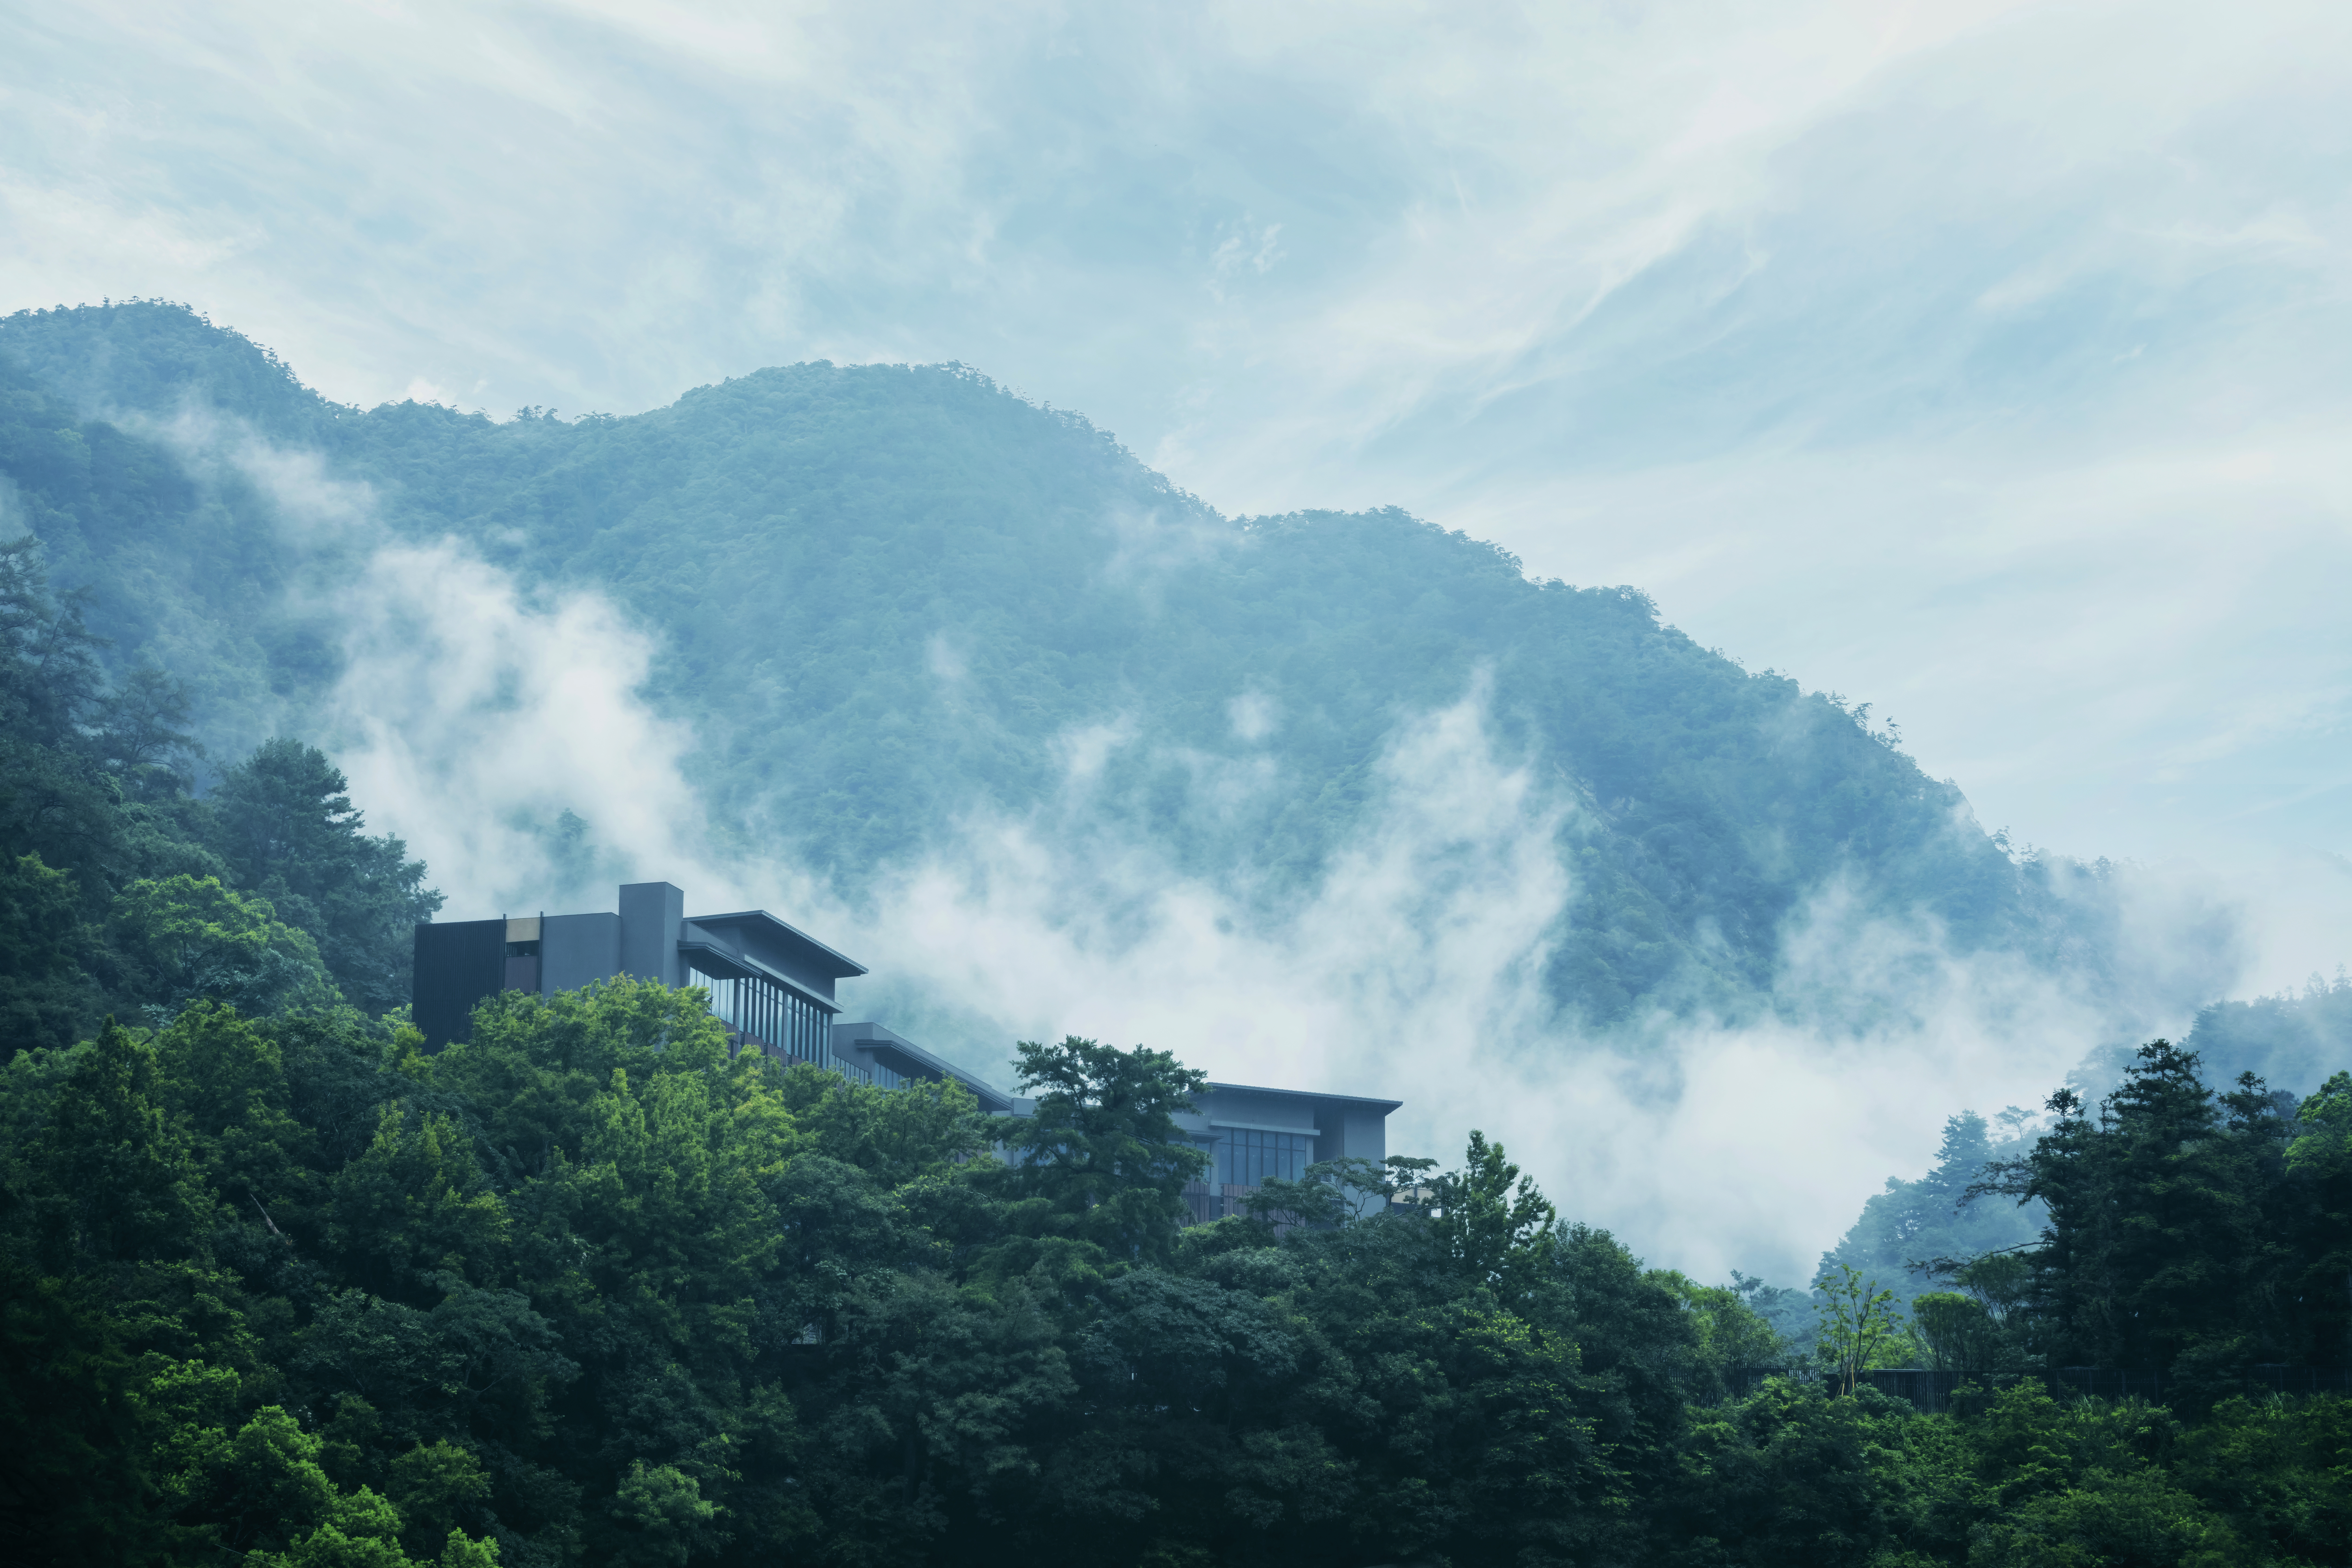 Hoshinoya Guguan Taiwan is located in a region known for hot springs